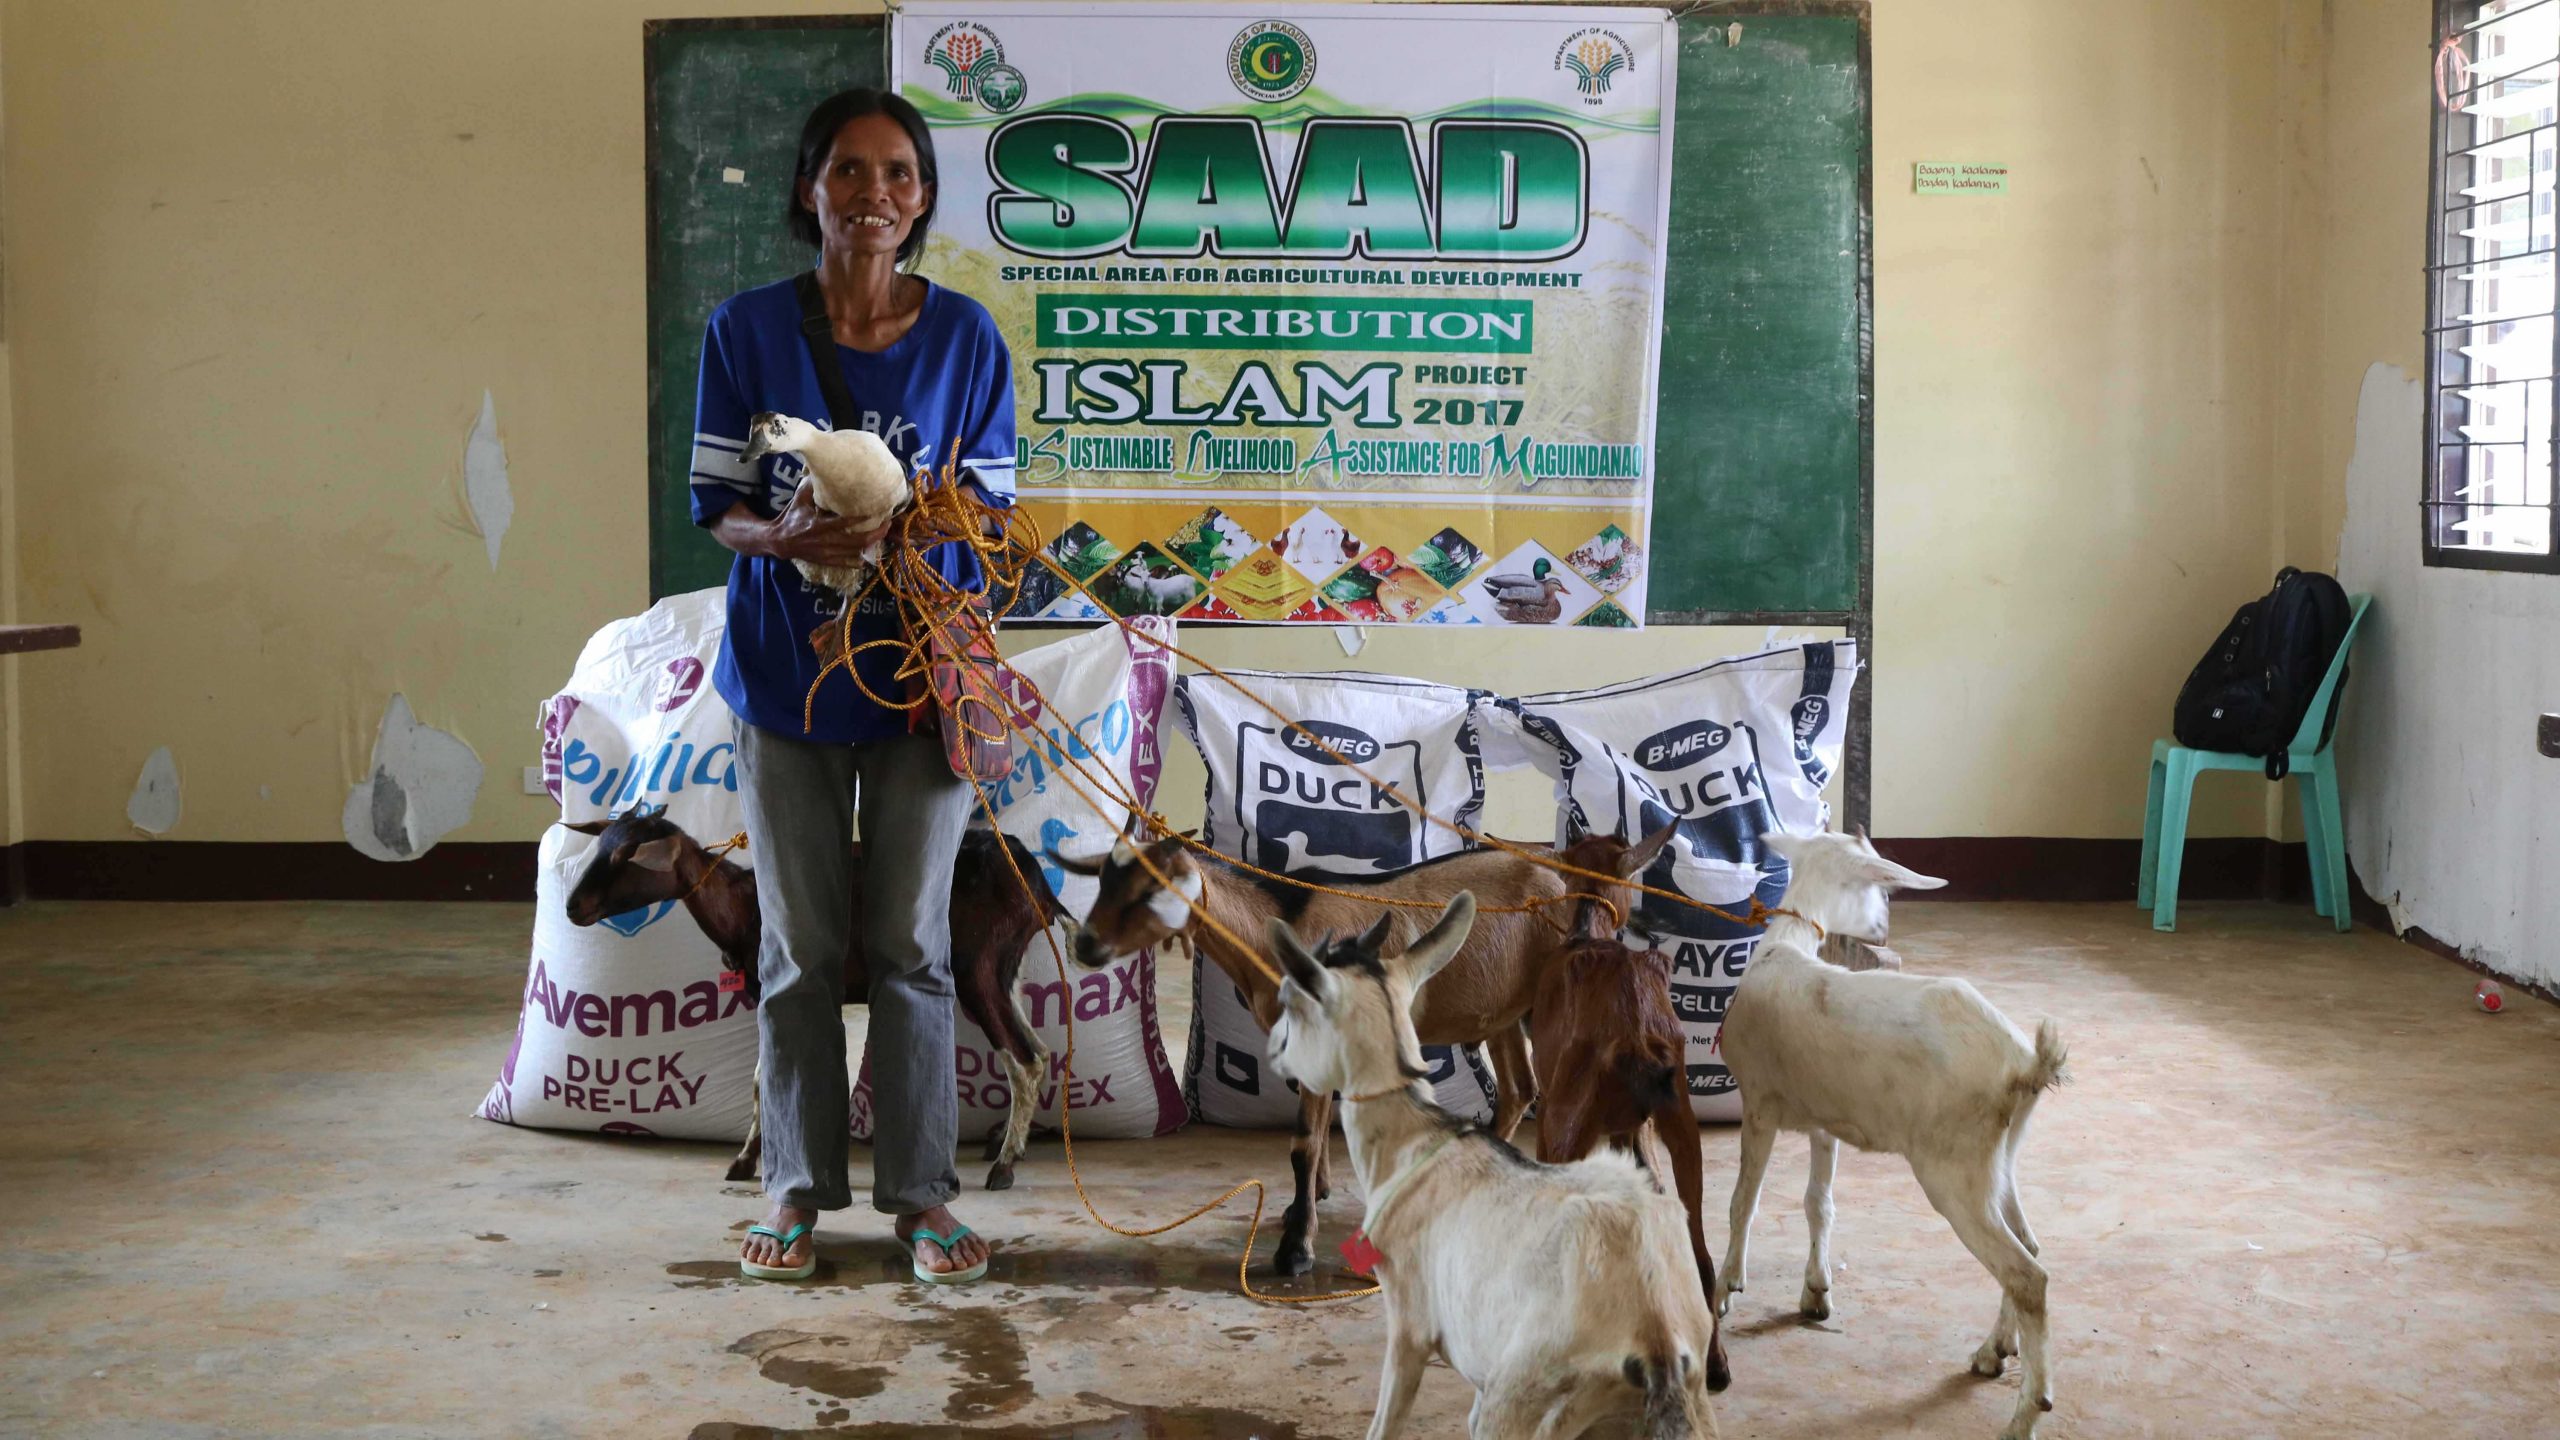 SAAD Maguindanao conducts 3-day continuous distribution for ISLAM Project 2017